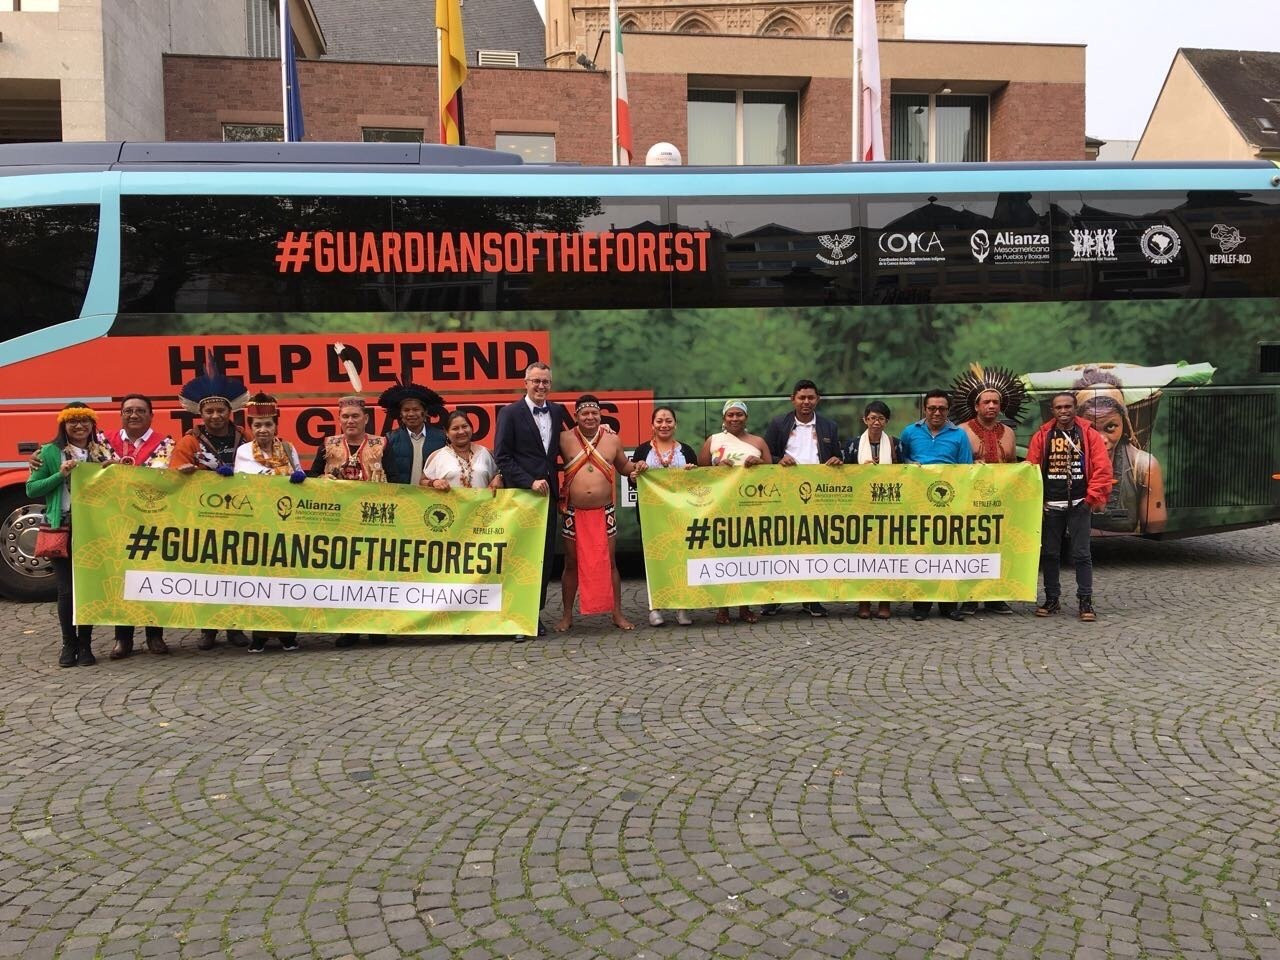 Indigenous Peoples posing with banners in front of the #GuardiansOfTheForest Bus